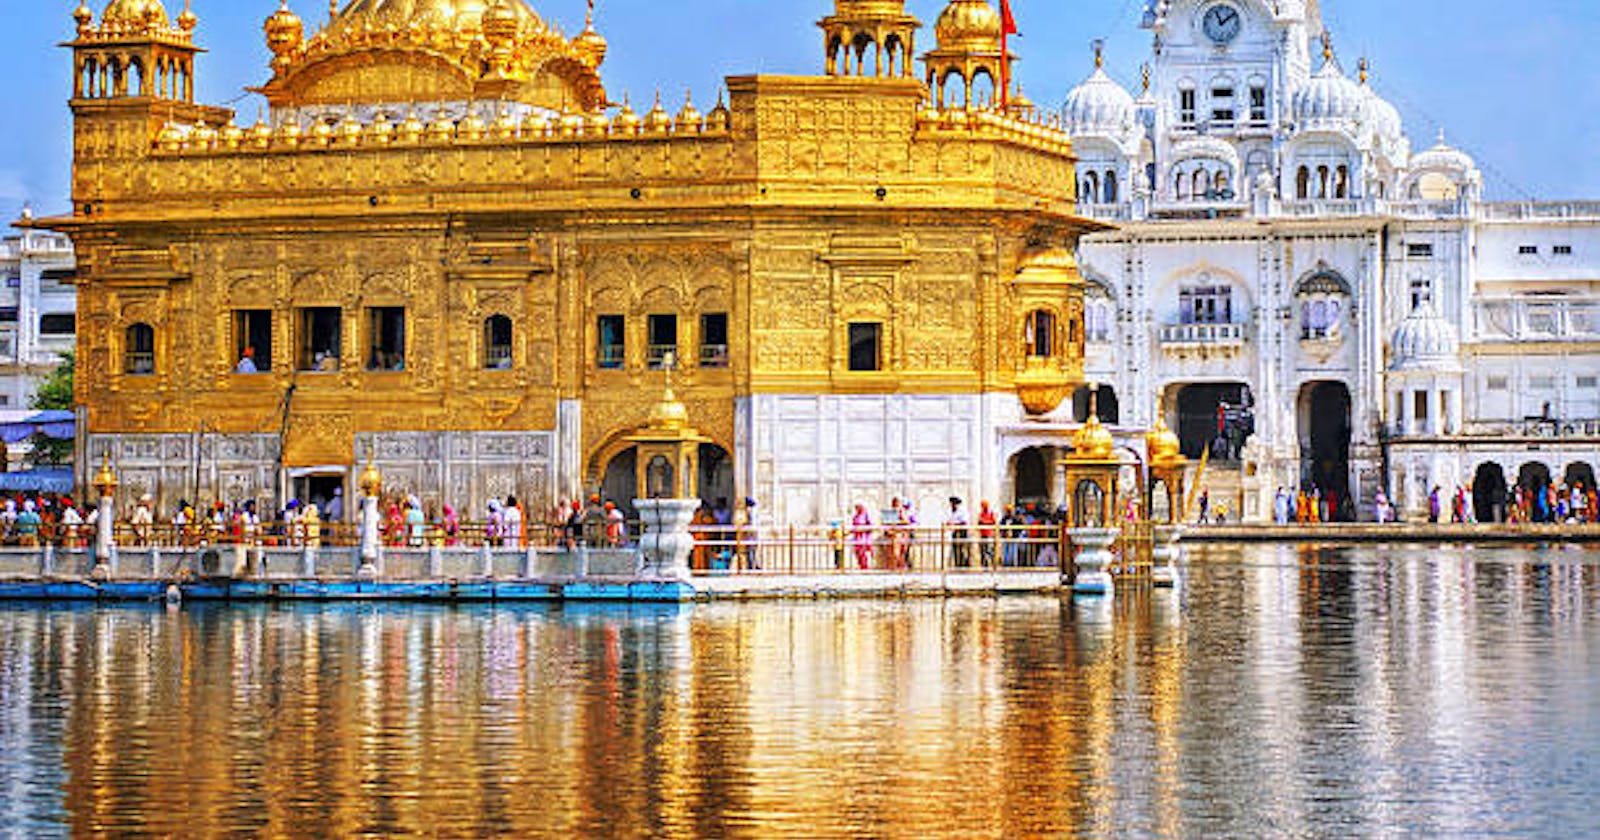 Must Visit To Golden Temple Of Amritsar